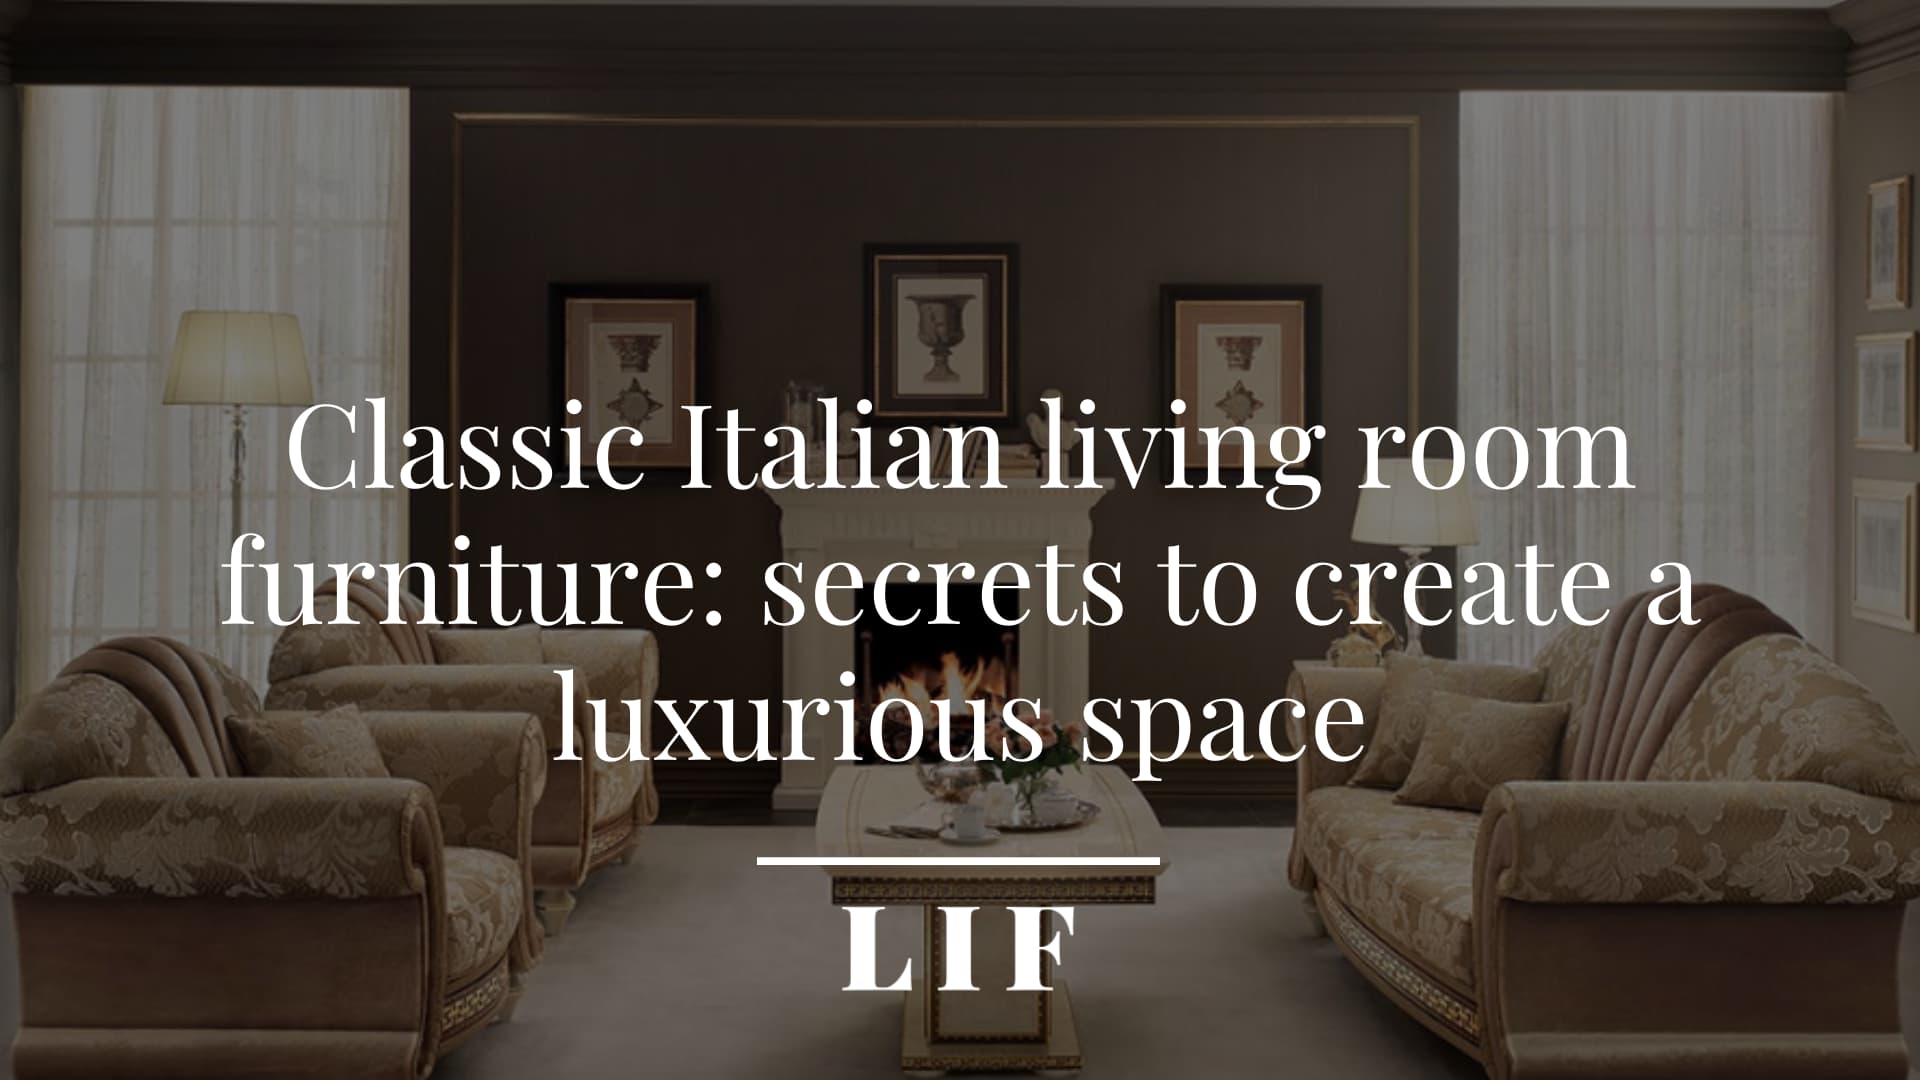 Italian Interior Design: 20 Images of Italy's Most Beautiful Homes